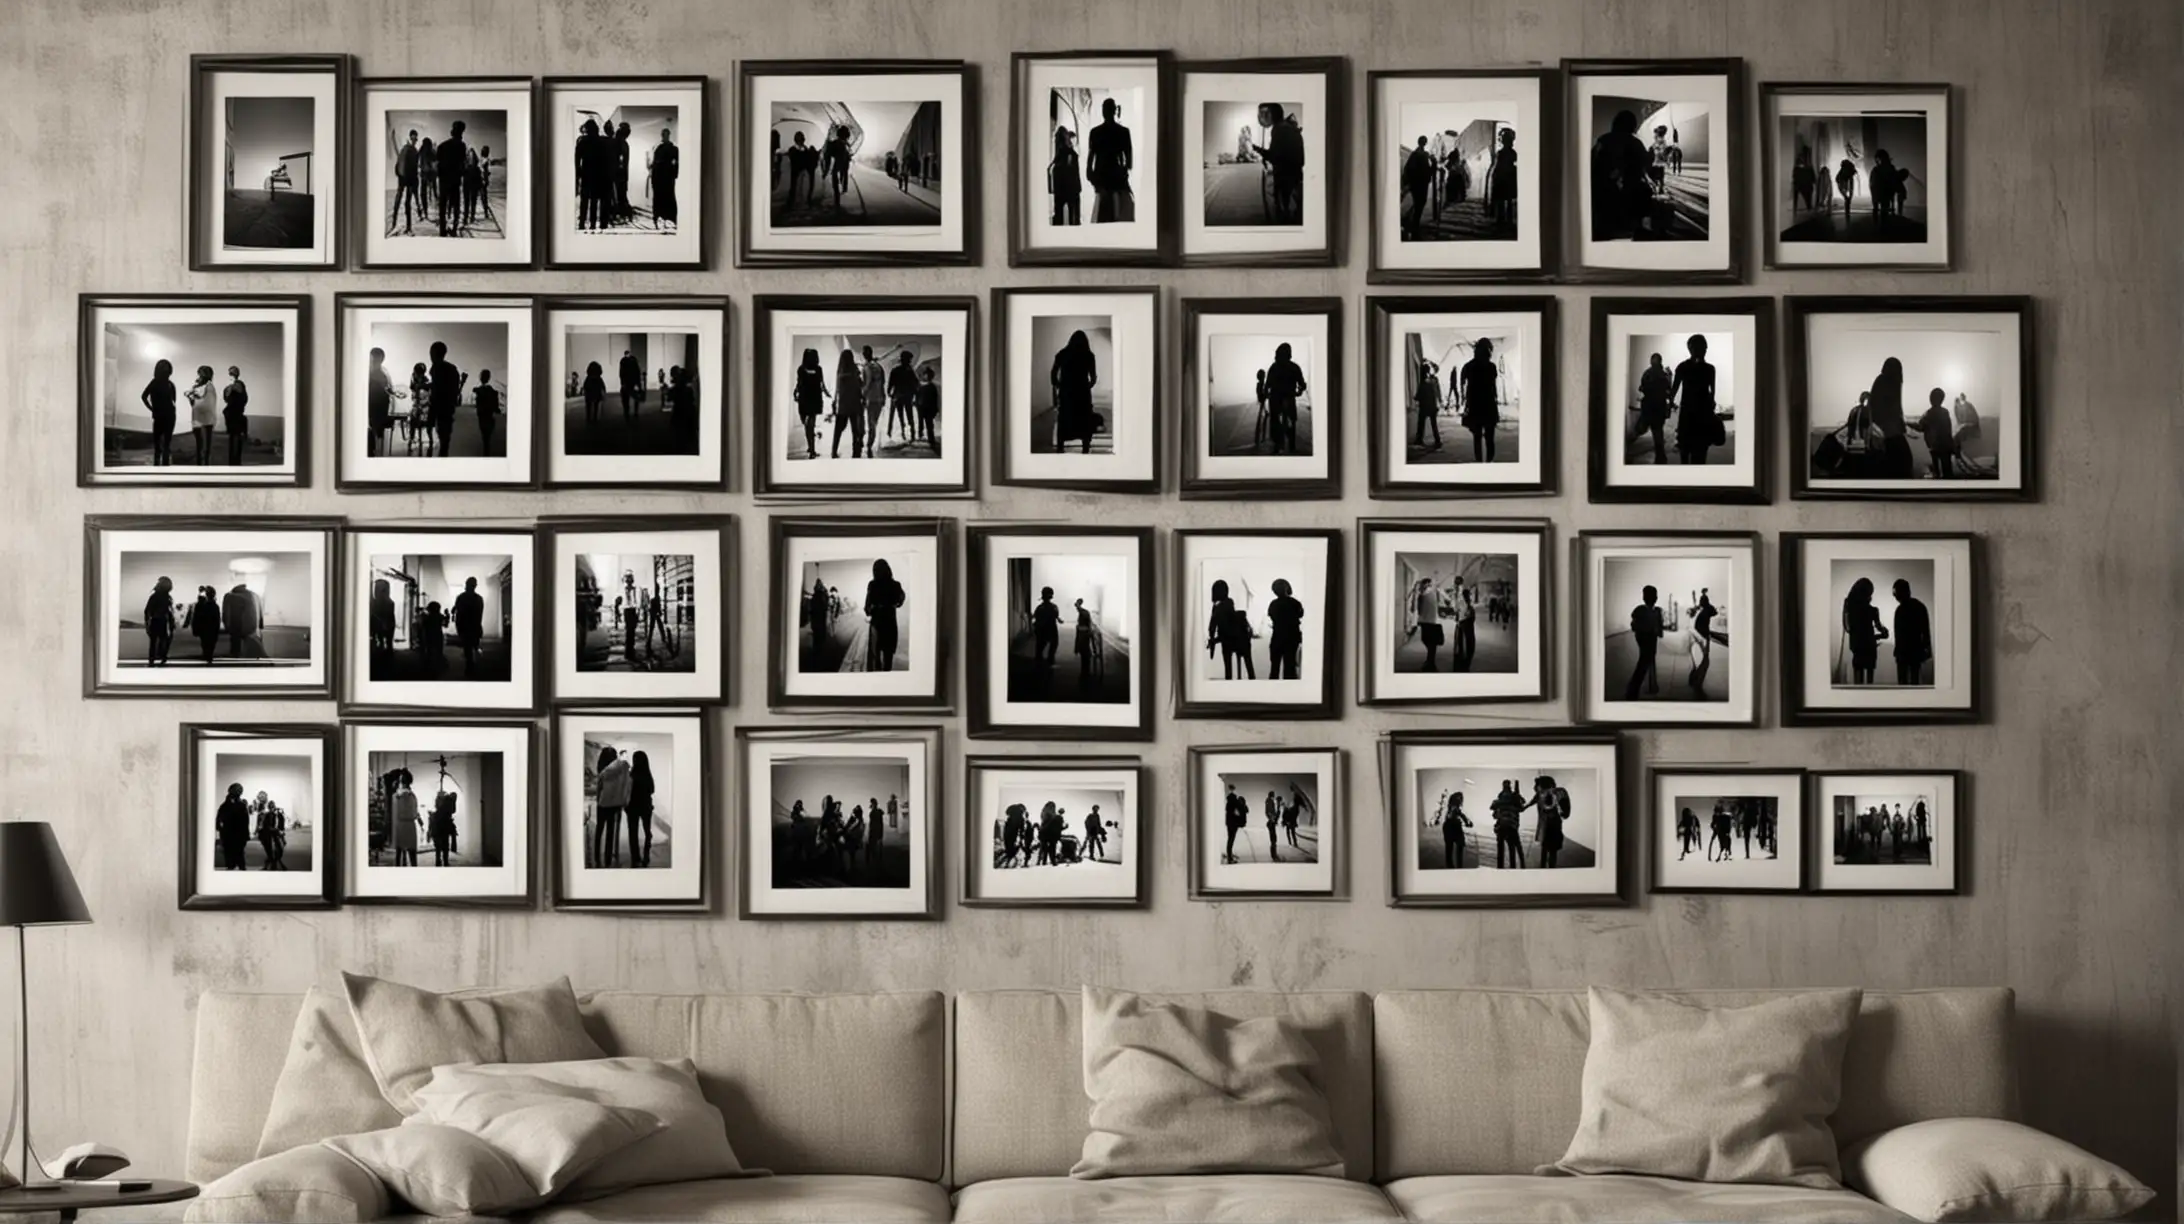 Generate an image of a photo gallery on a wall, there should be silhouettes of people in the images. The photos should be pinned on a board. Should have a clean modern look.